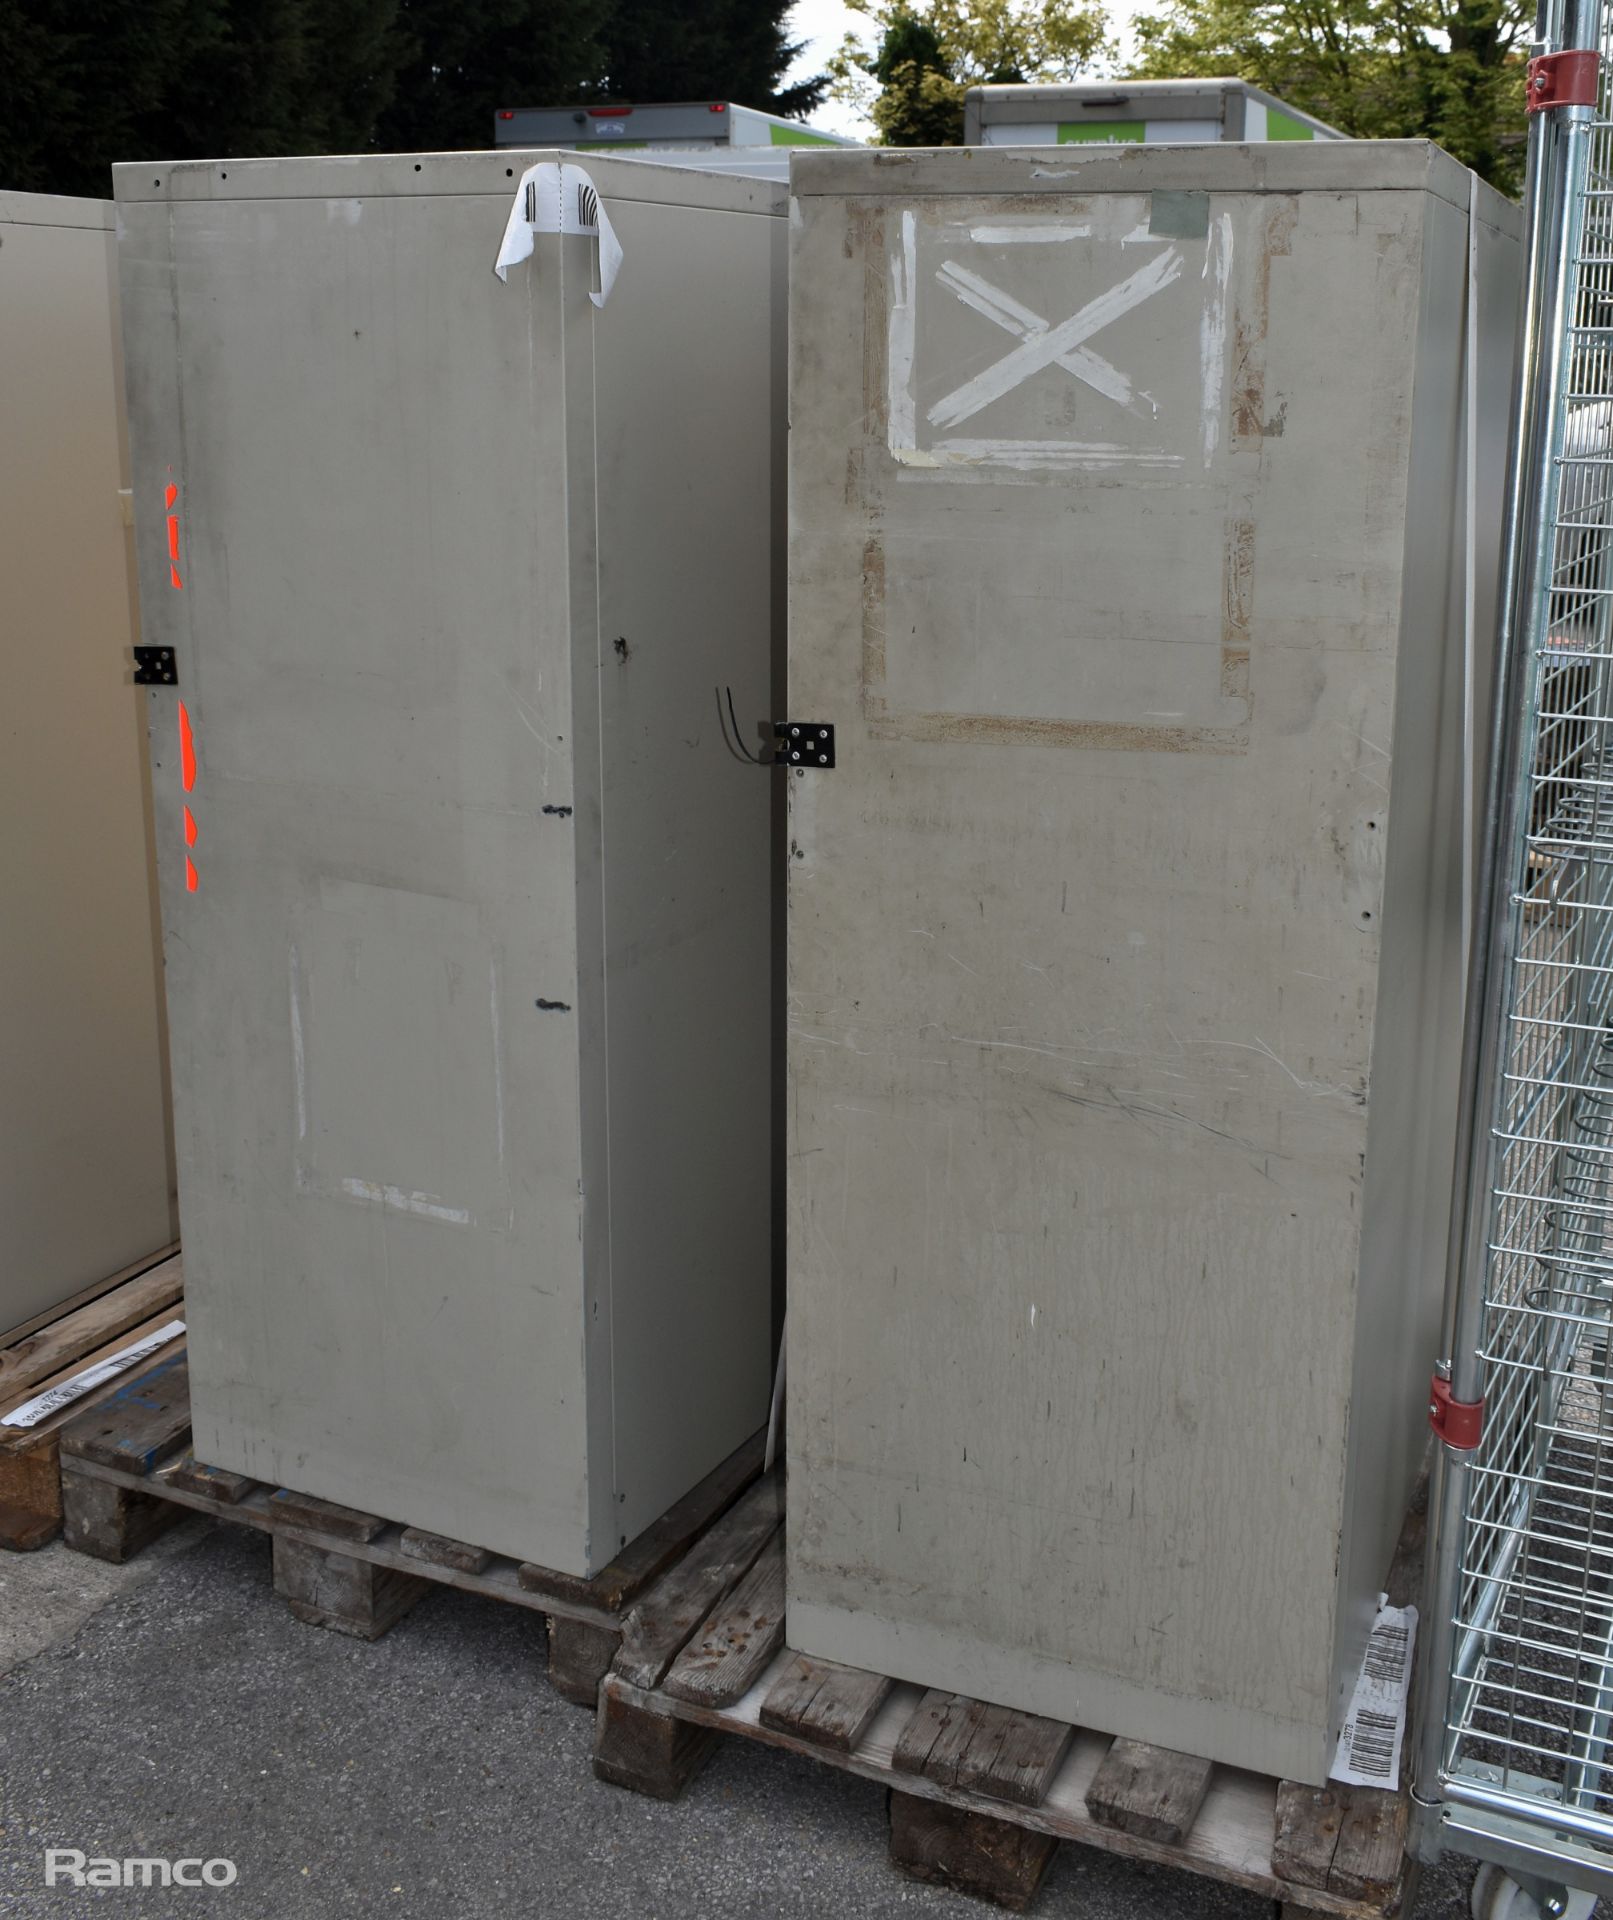 4x Elite mobile maintenance tool cabinet - L 1250 x W 550 x H 1650mm - SPARES OR REPAIRS - Image 8 of 9